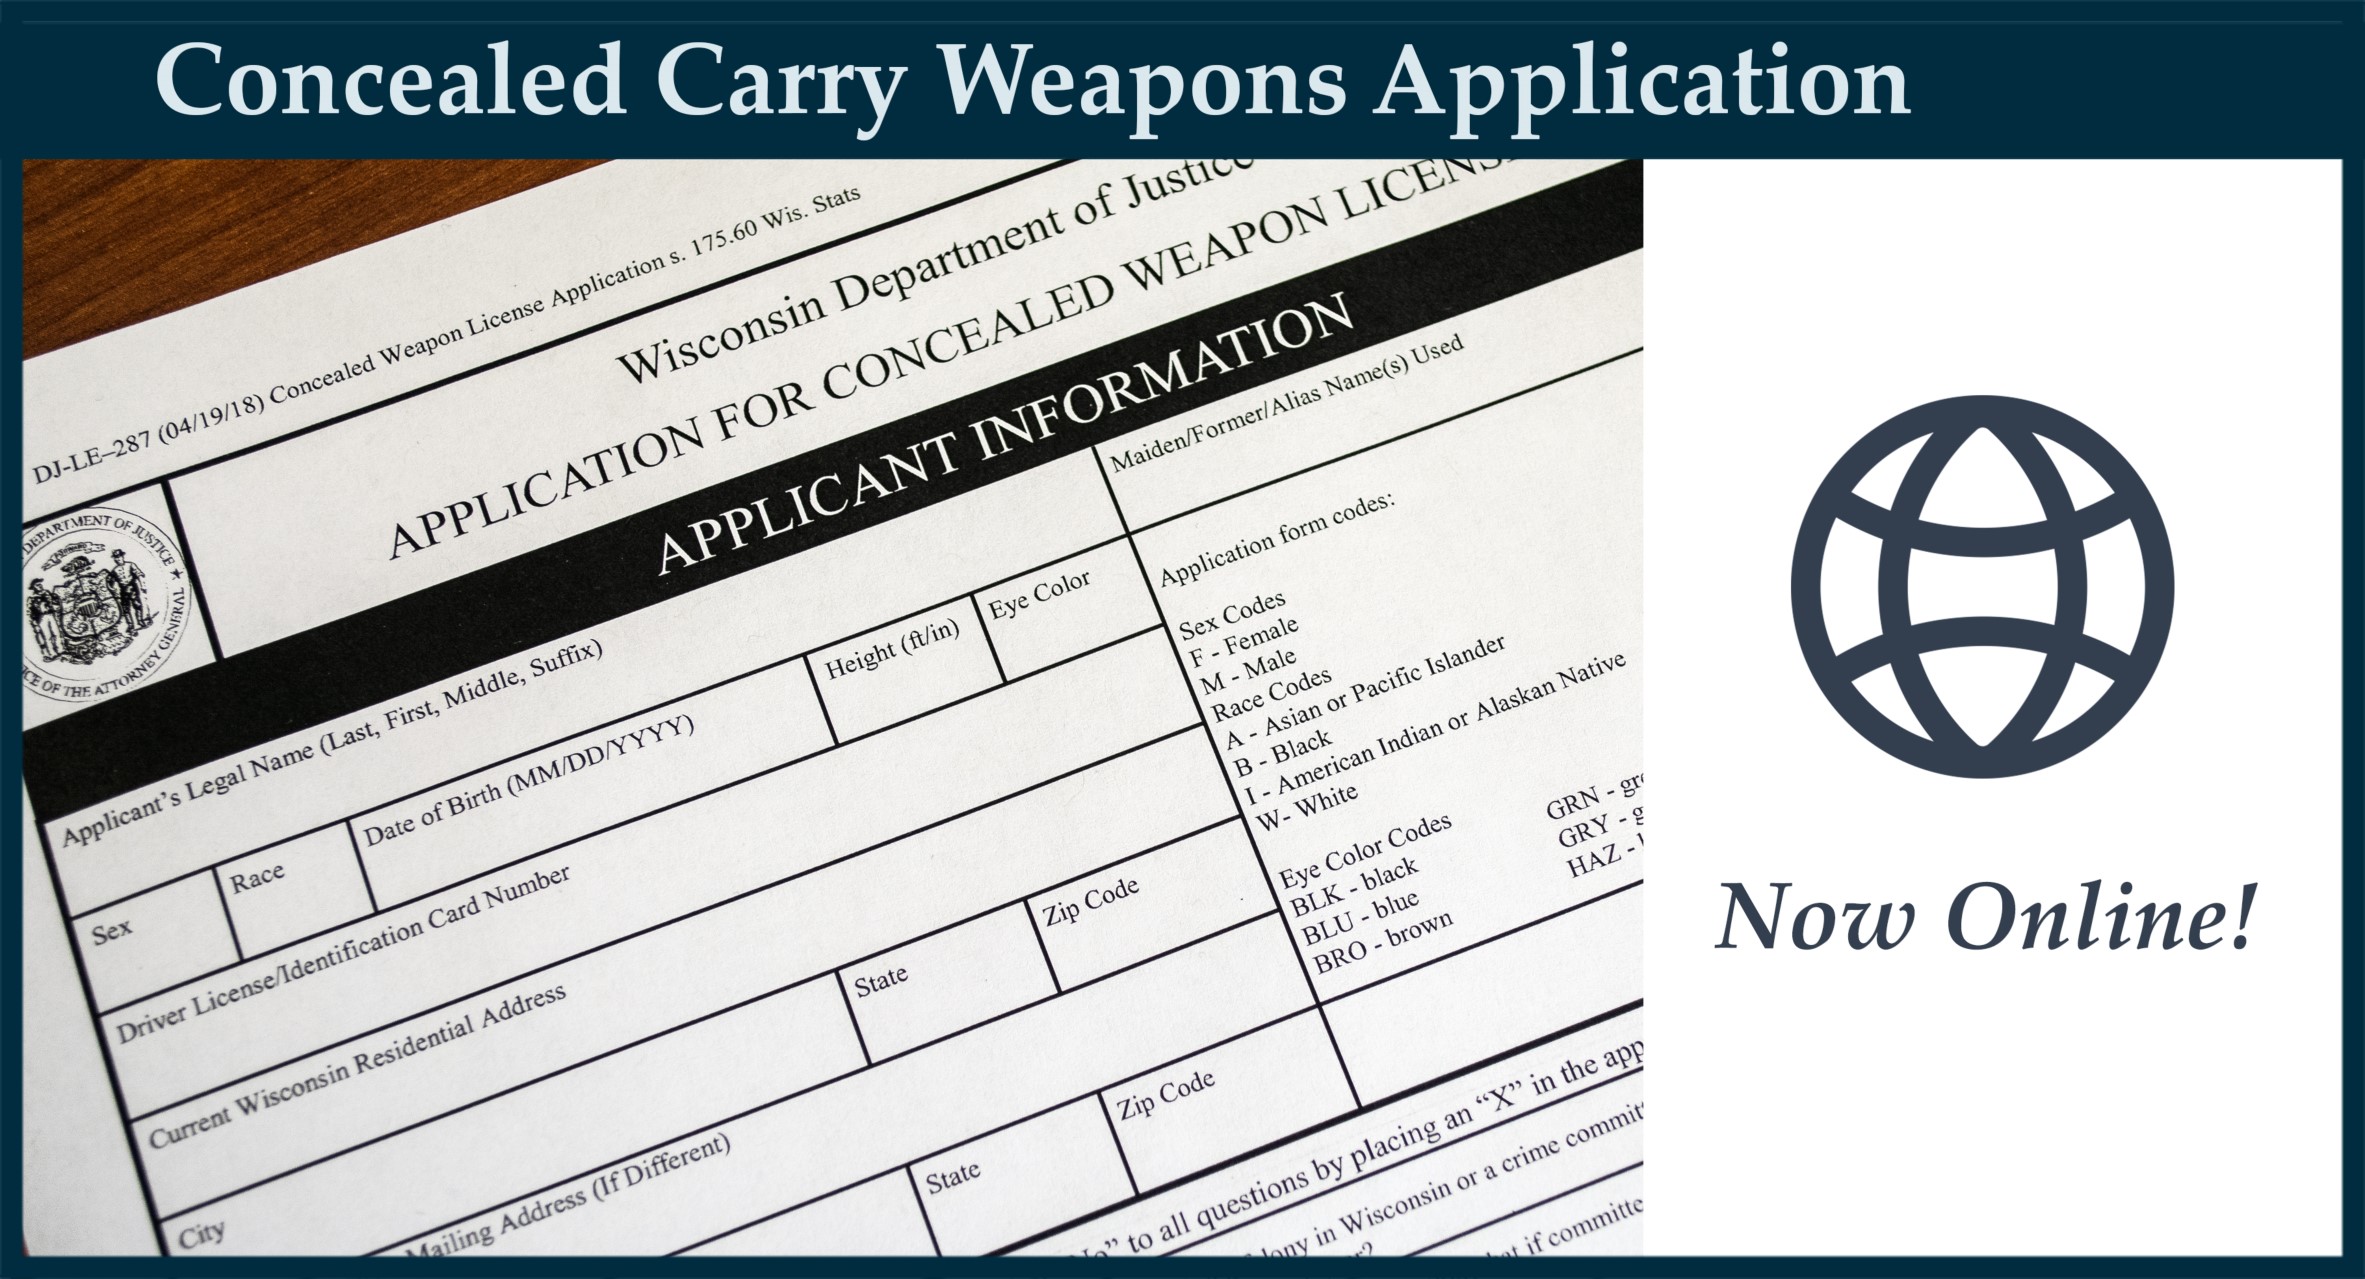 Concealed Carry Weapons Application... Now Online!